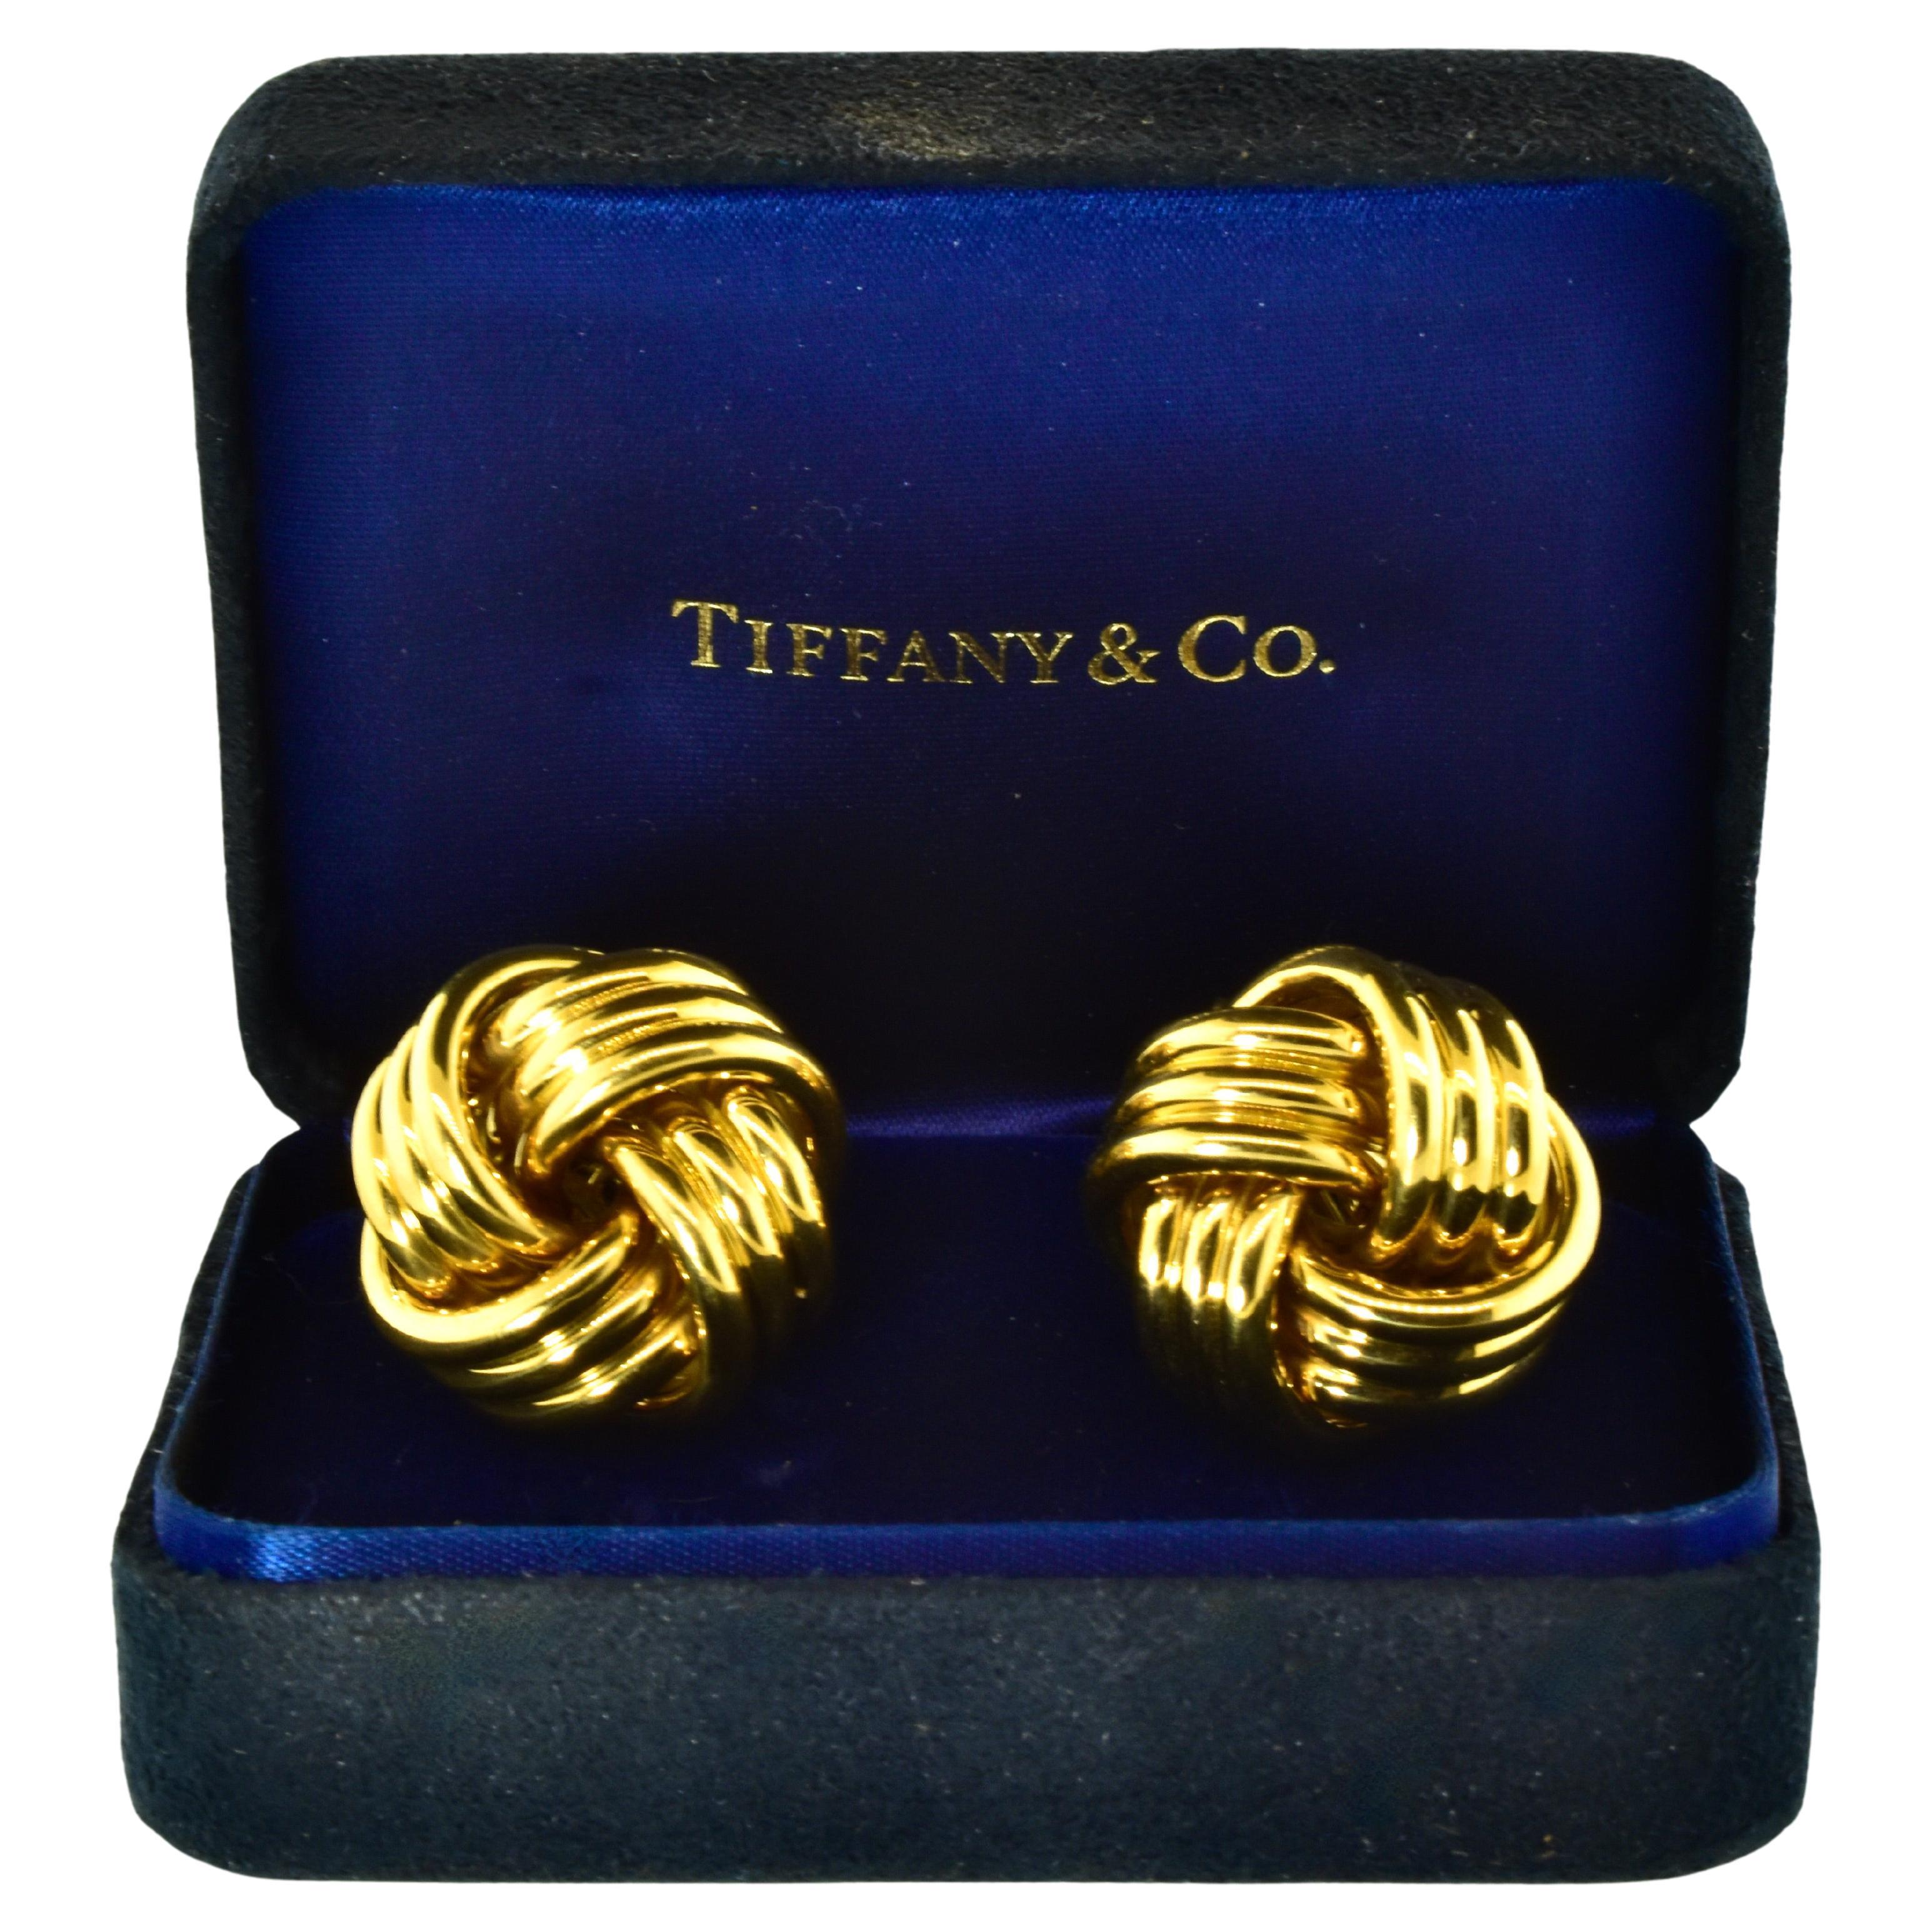 Tiffany & Co. 18k Love Knot Fine Earrings, the Largest Size Made, circa 2000